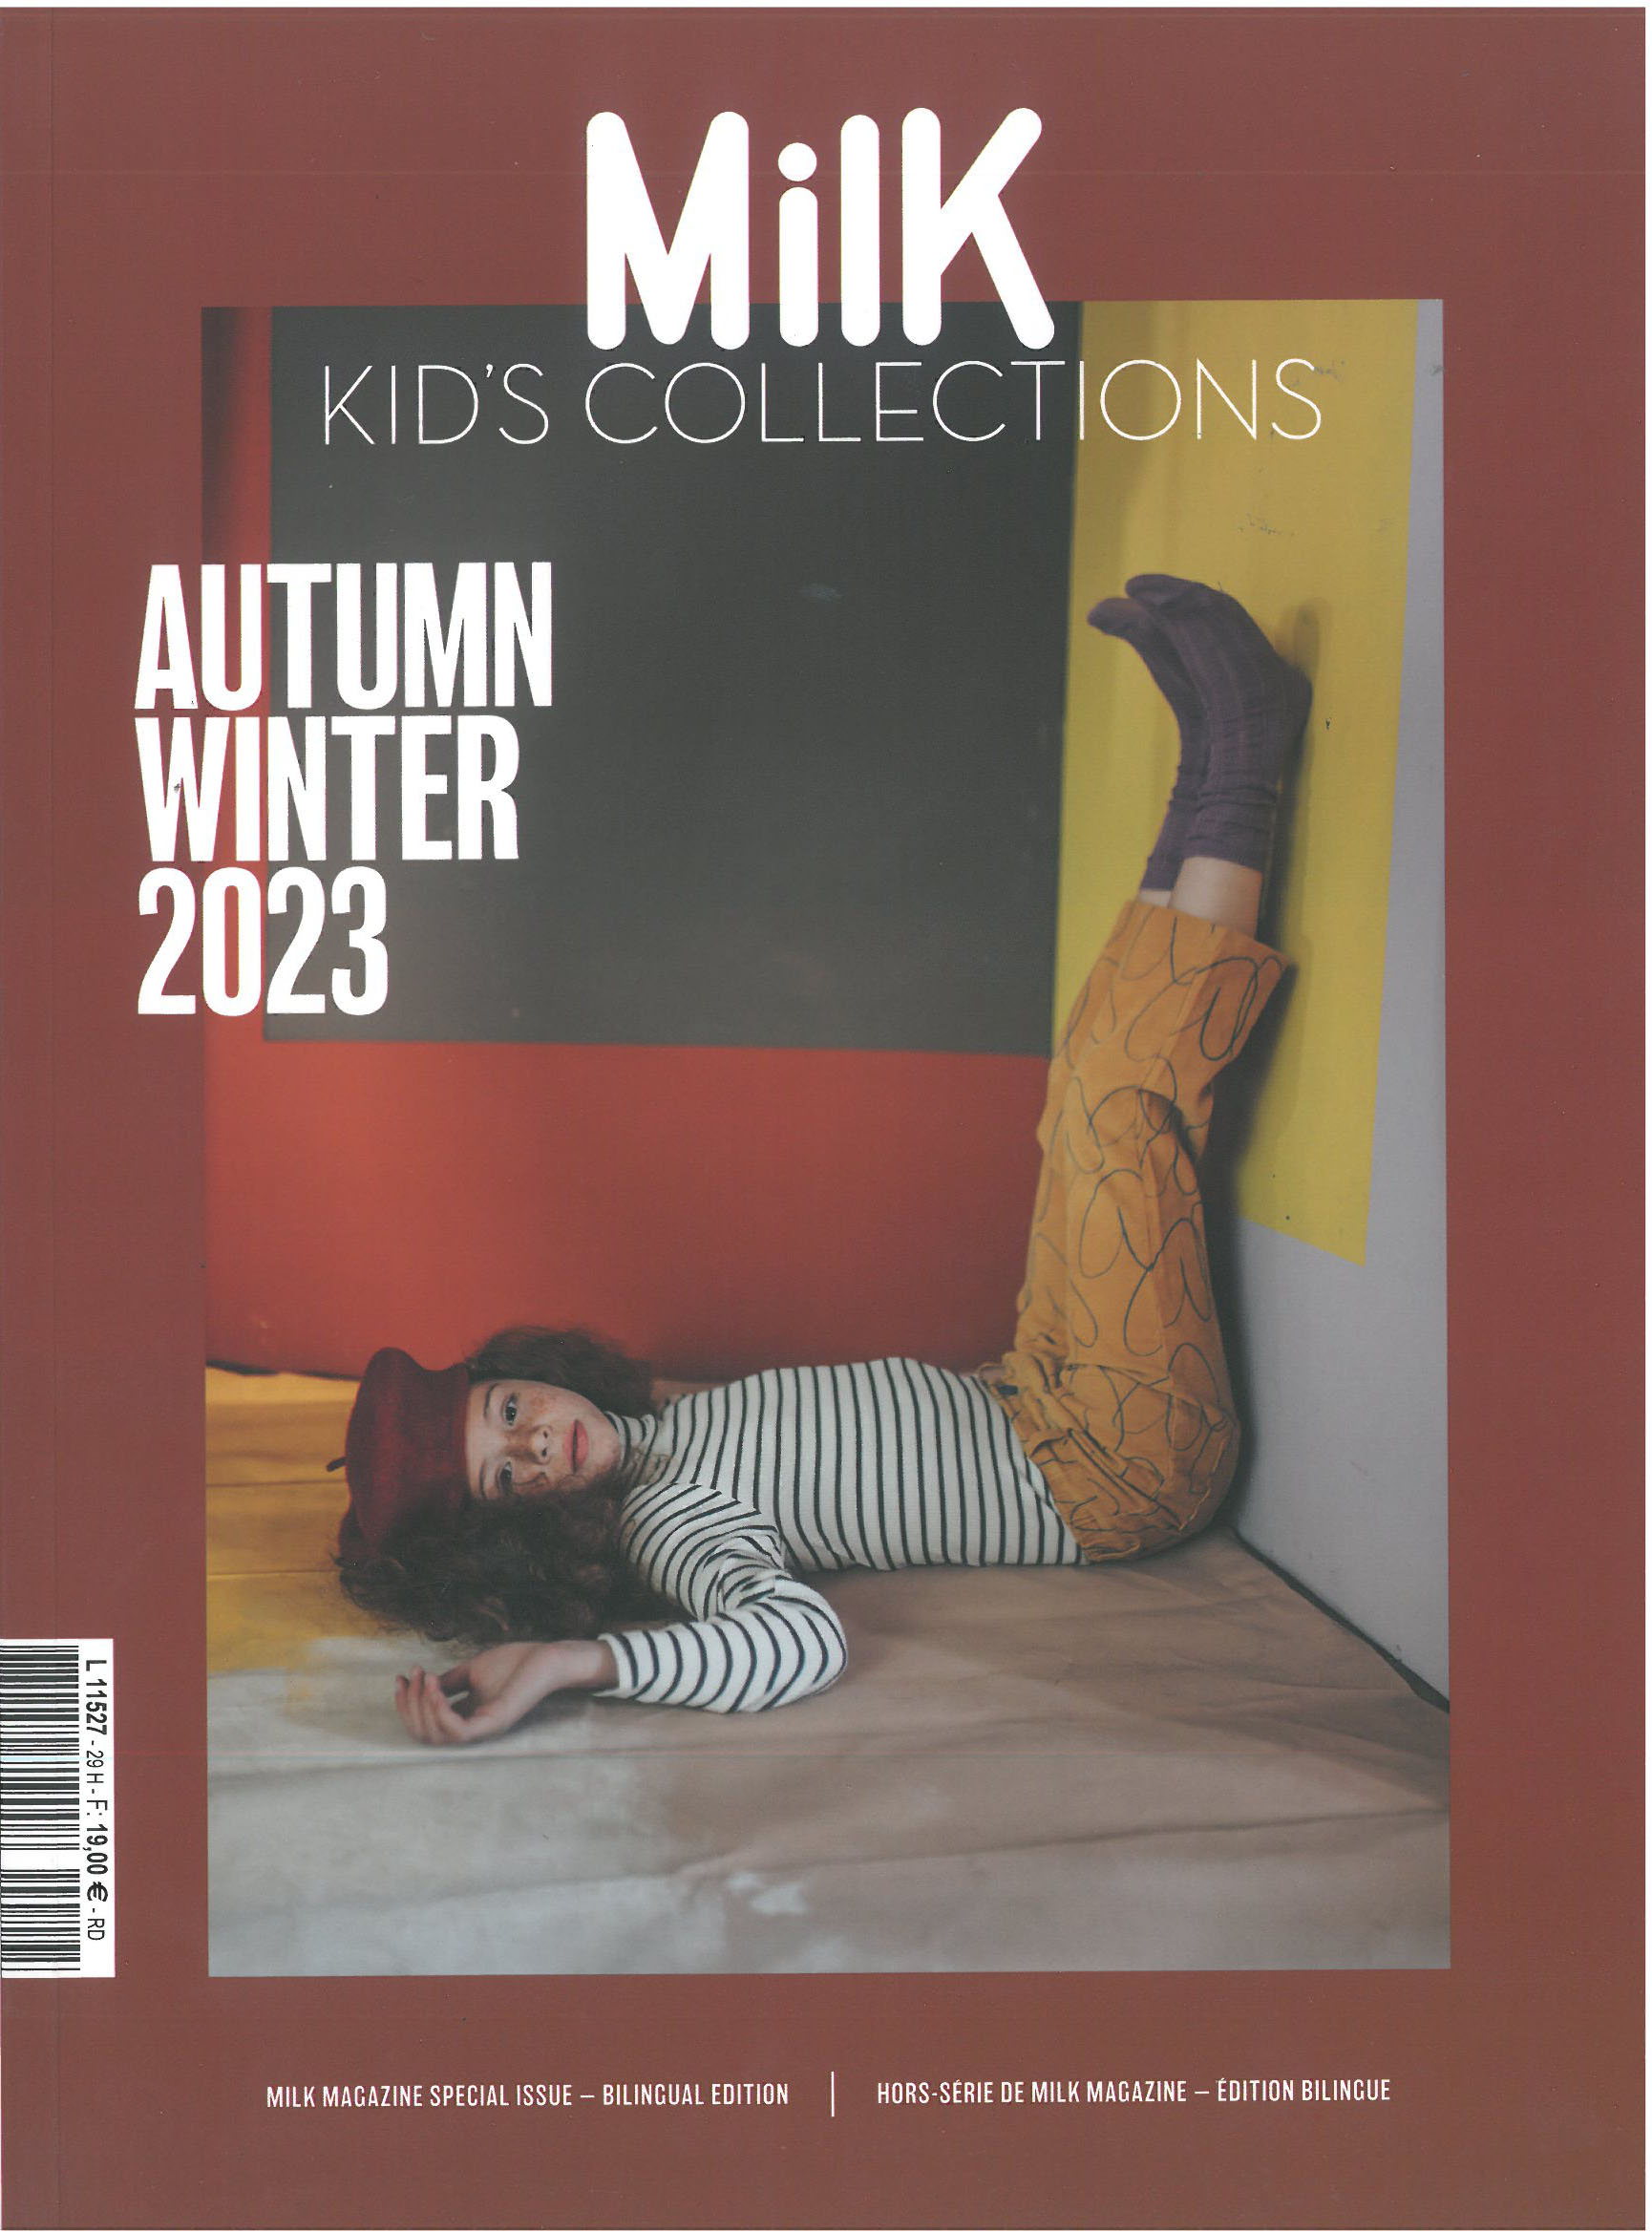 MILK KIDS COLLECTIONS